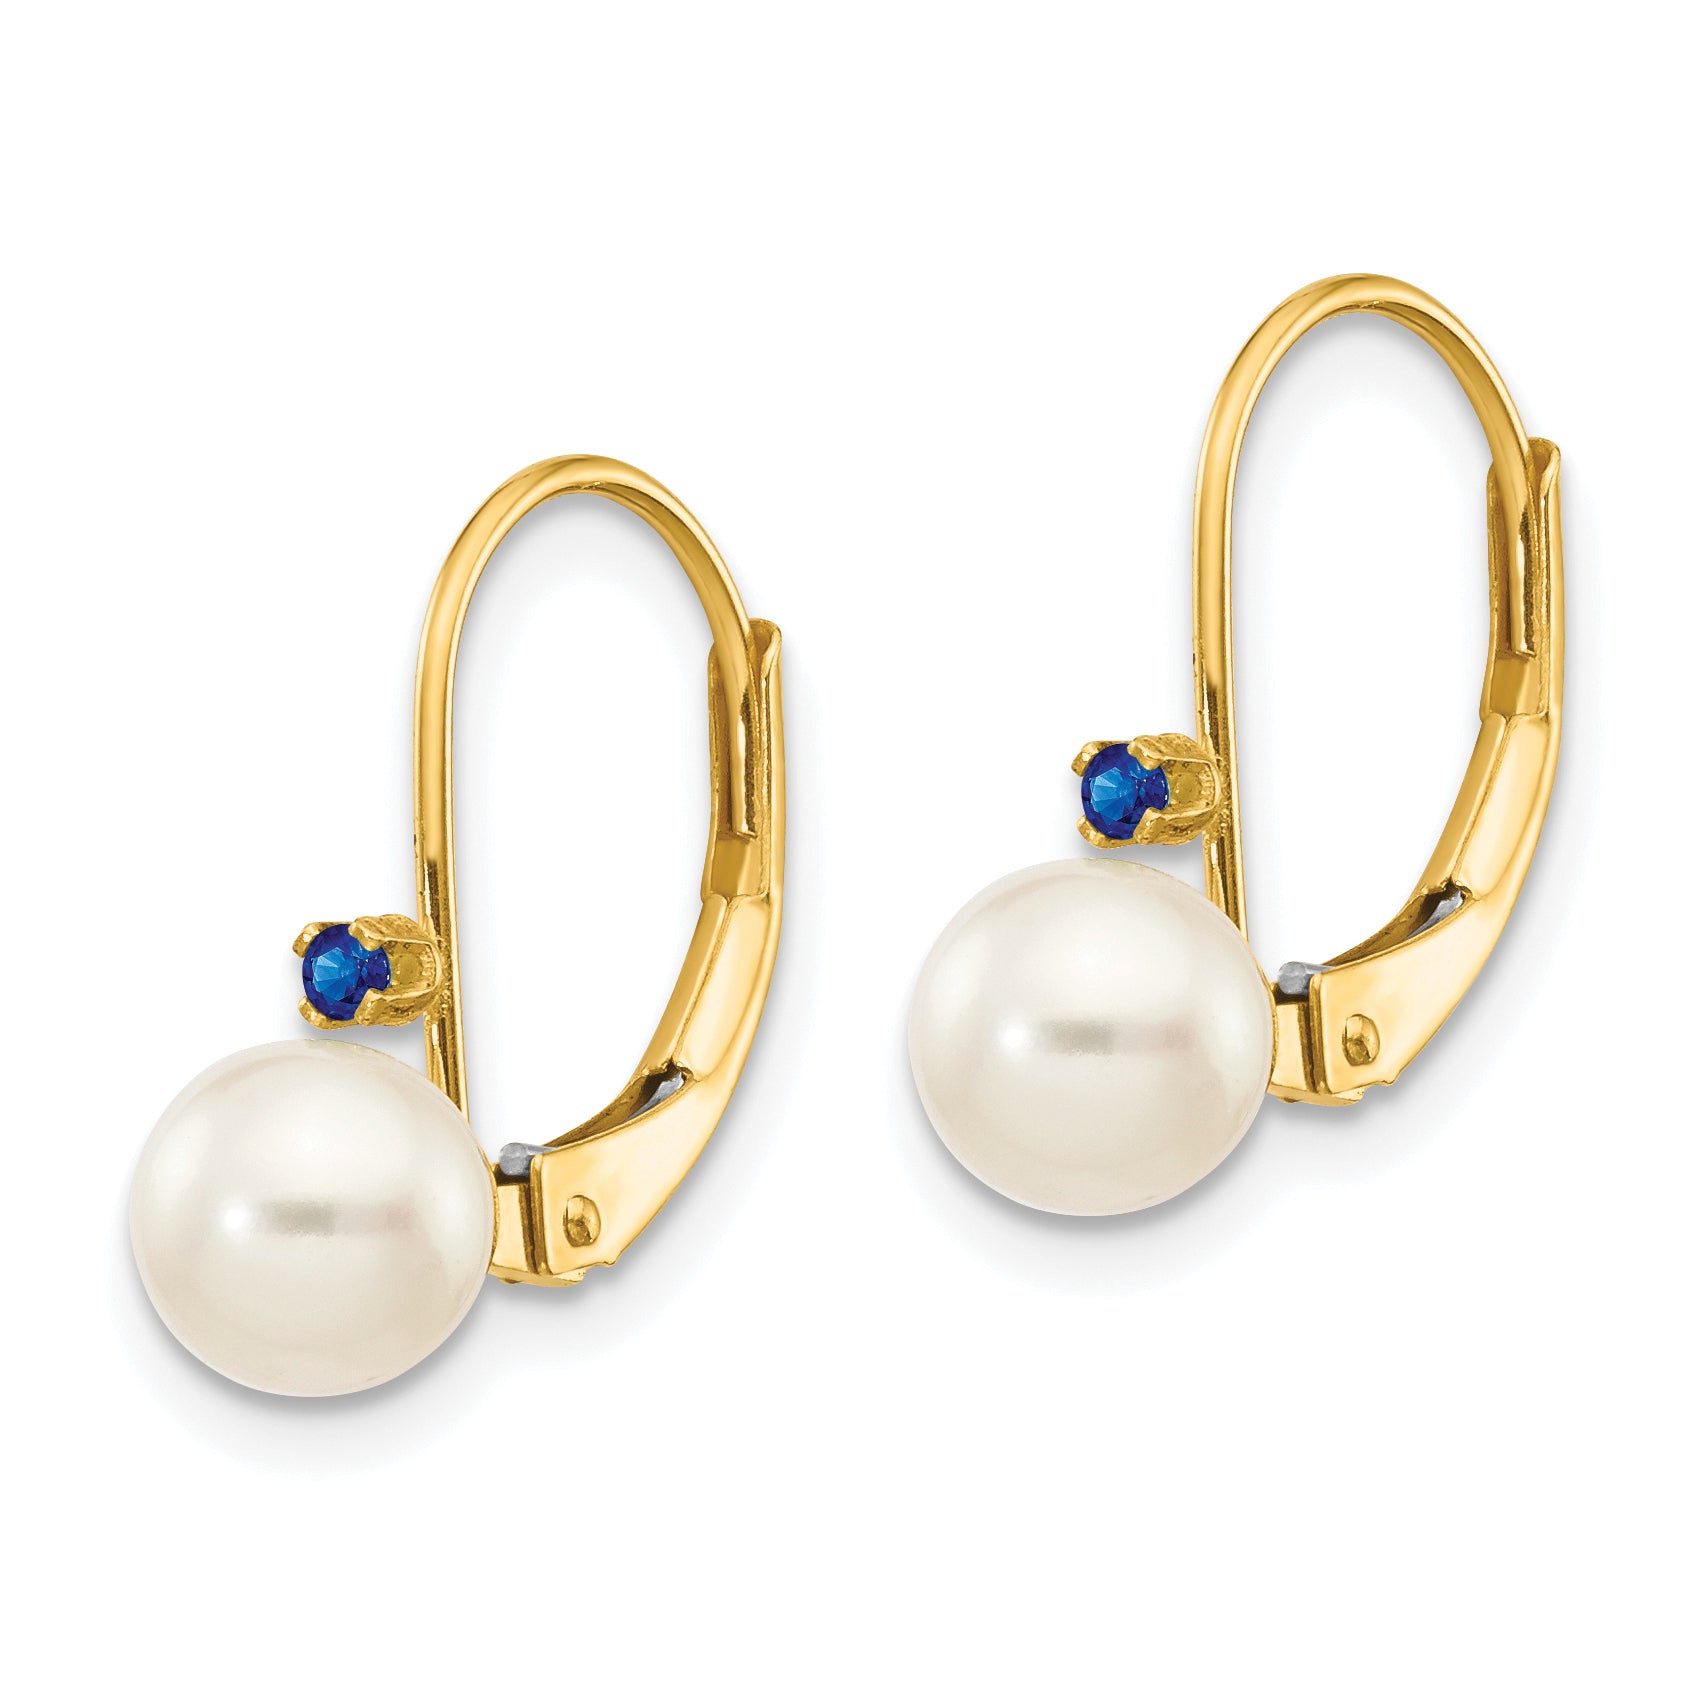 14k 5-5.5mm White Round FW Cultured Pearl Sapphire Leverback Earrings